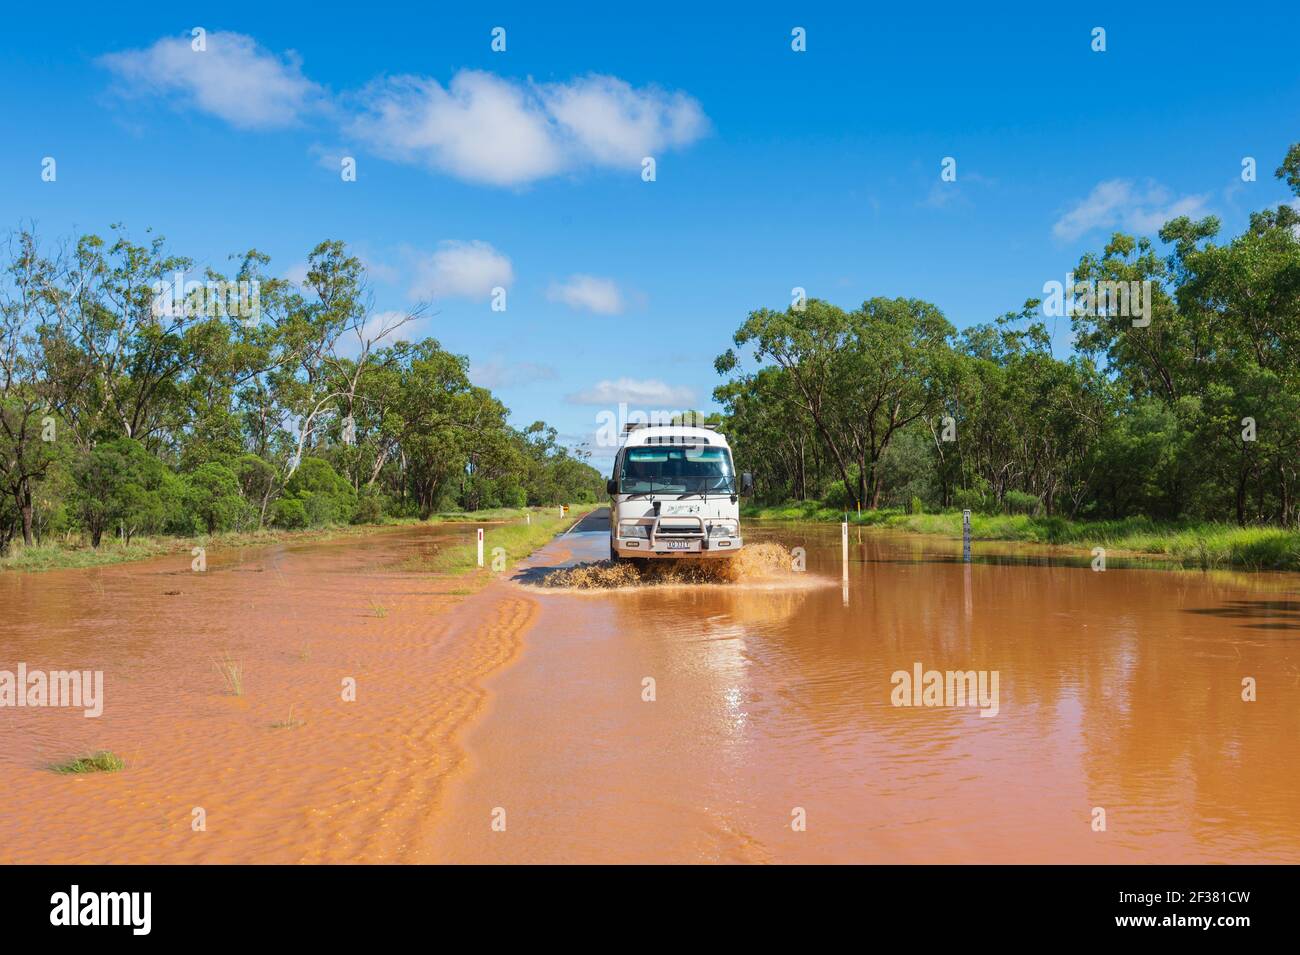 Toyota Coaster mini-bus driving through floods on a remote Outback road covered in red mud after a storm, near Thallon, Queensland, QLD, Australia Stock Photo